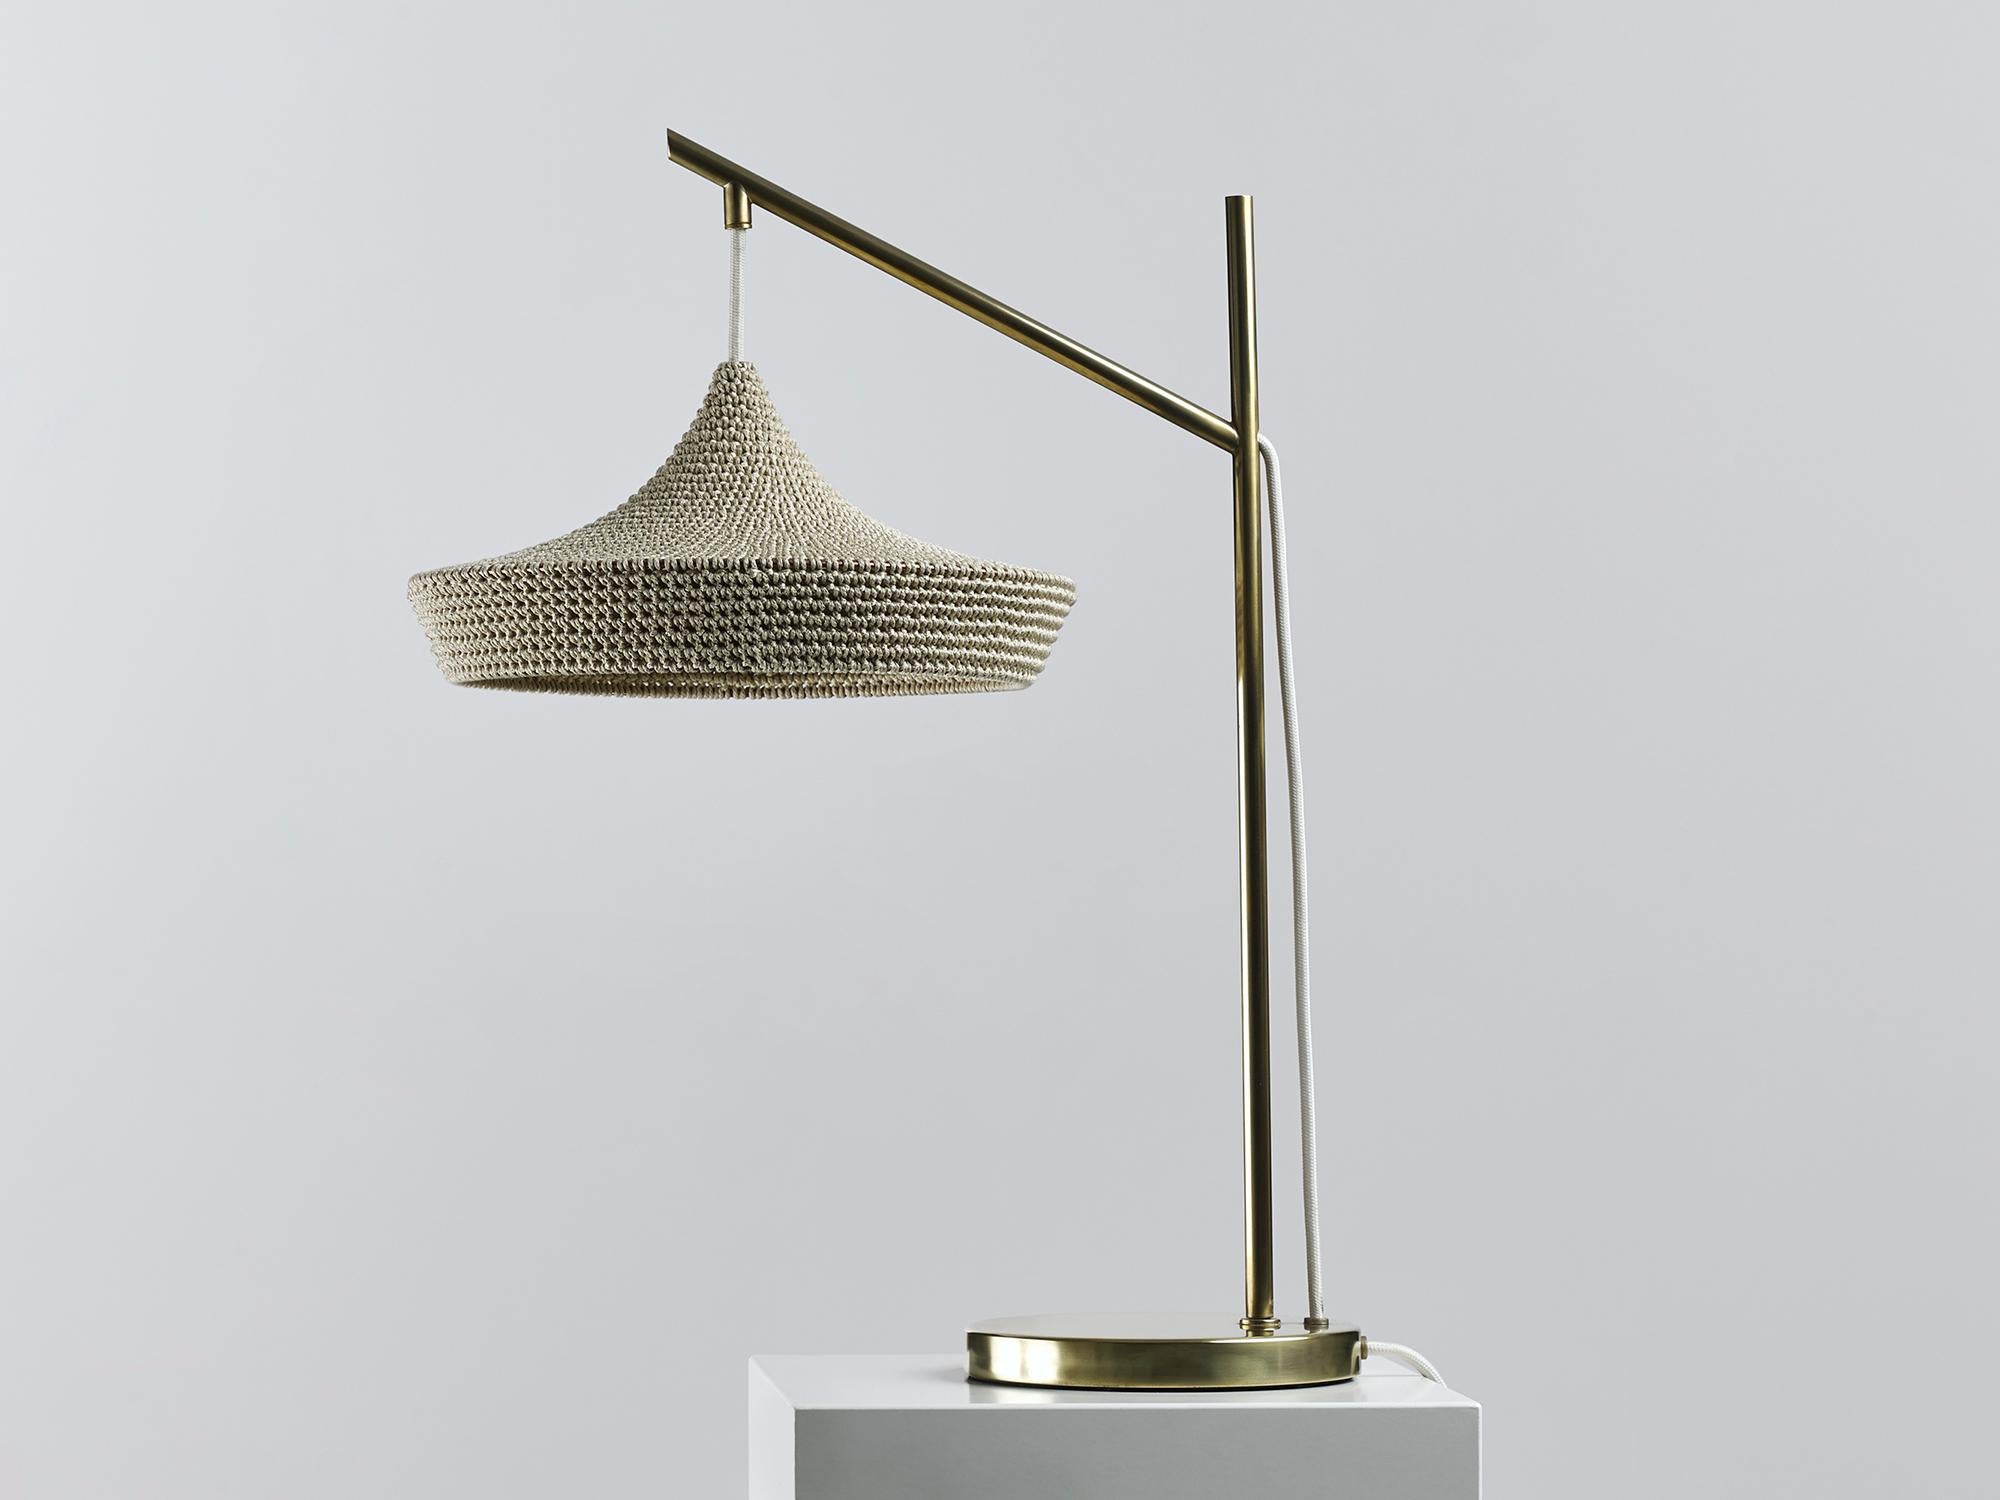 Cave table lamp by Naomi Paul
Dimensions: D 30 x W 43 x H 57 cm
Materials: Metal frame, Egyptian cotton cord.
Color: Ecru.
Available in other colors.
Available in Inside edge colour or plain color finish.

LIGHT / SHADE collection are down